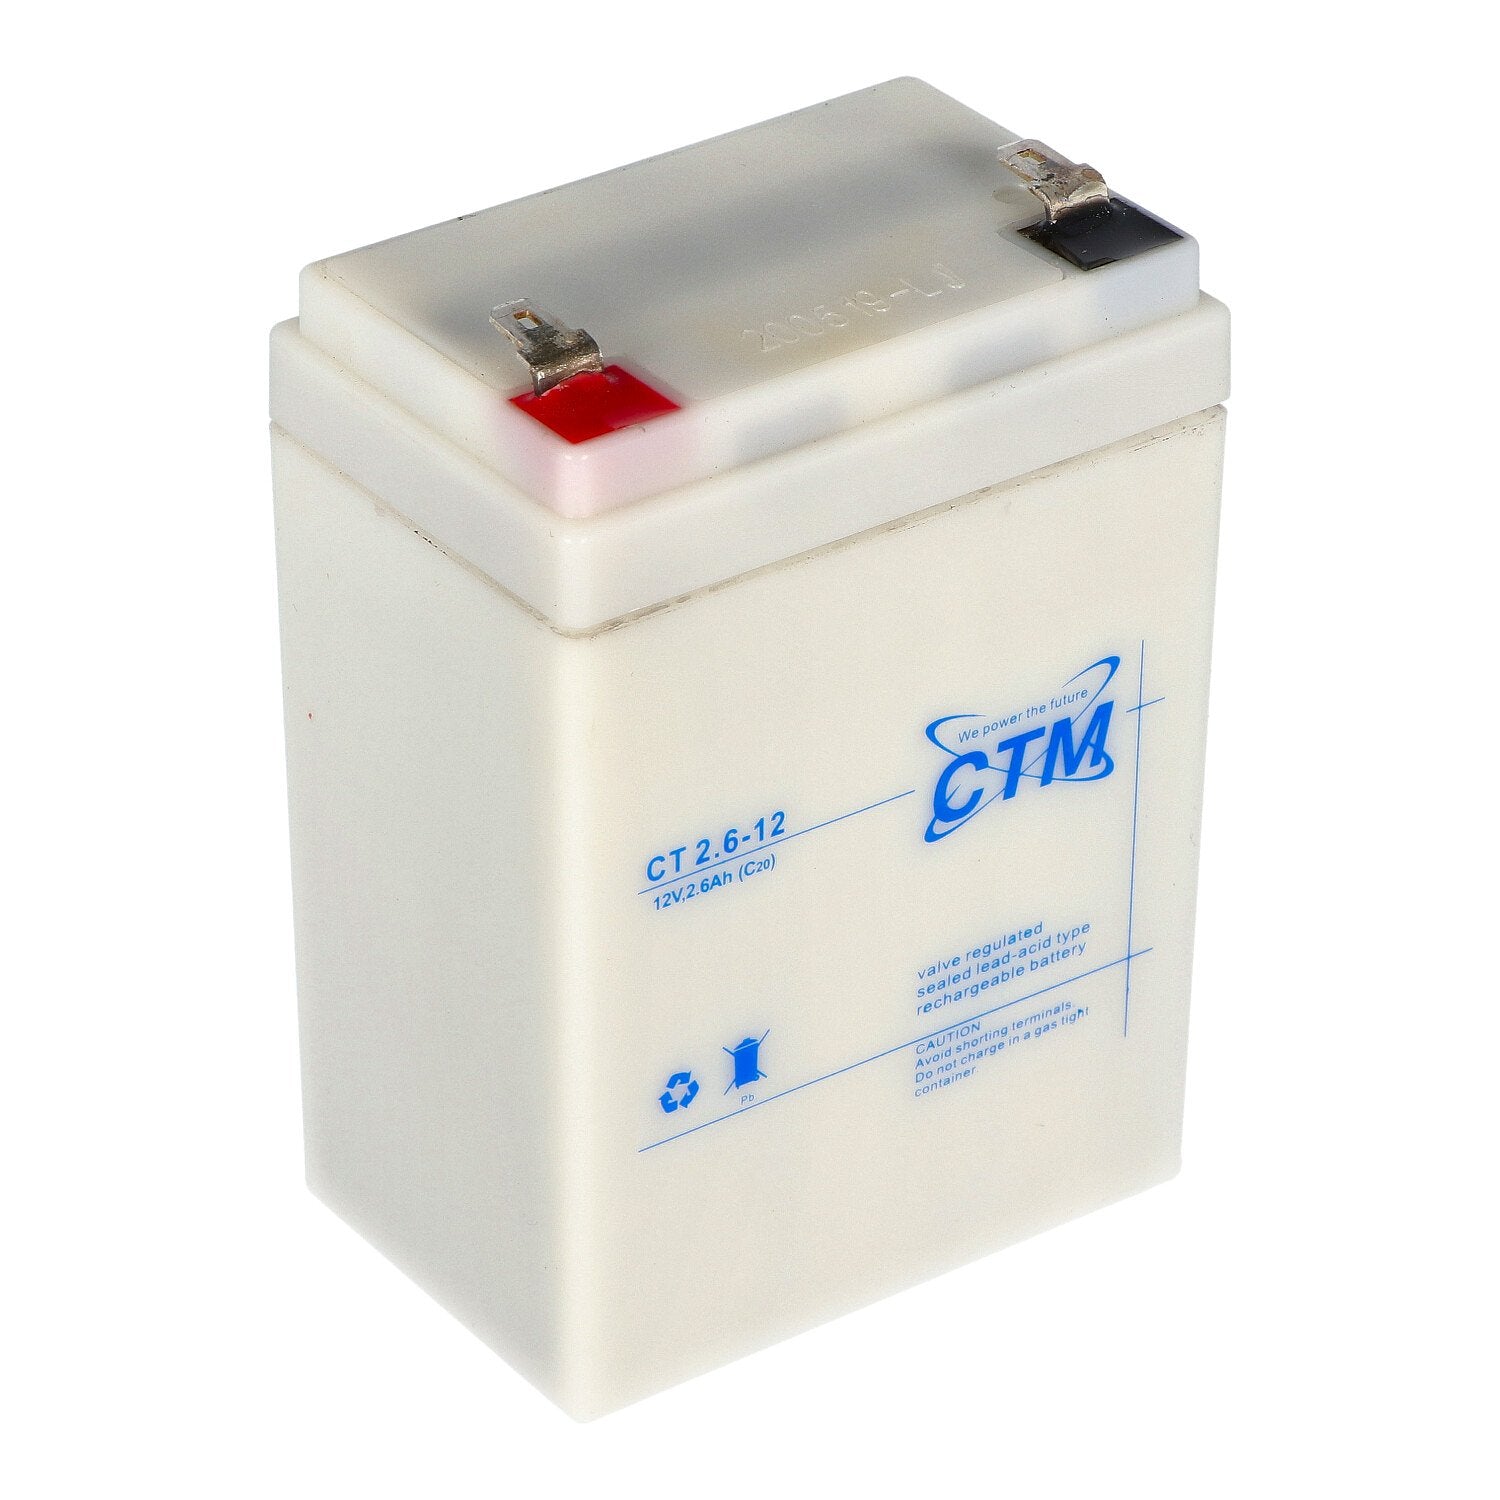 CTM 2.6-12 battery PB lead MP2.2-12D, MP2.2-12D, RLl1226, 6FM2.6 suitable for many areas of applicat